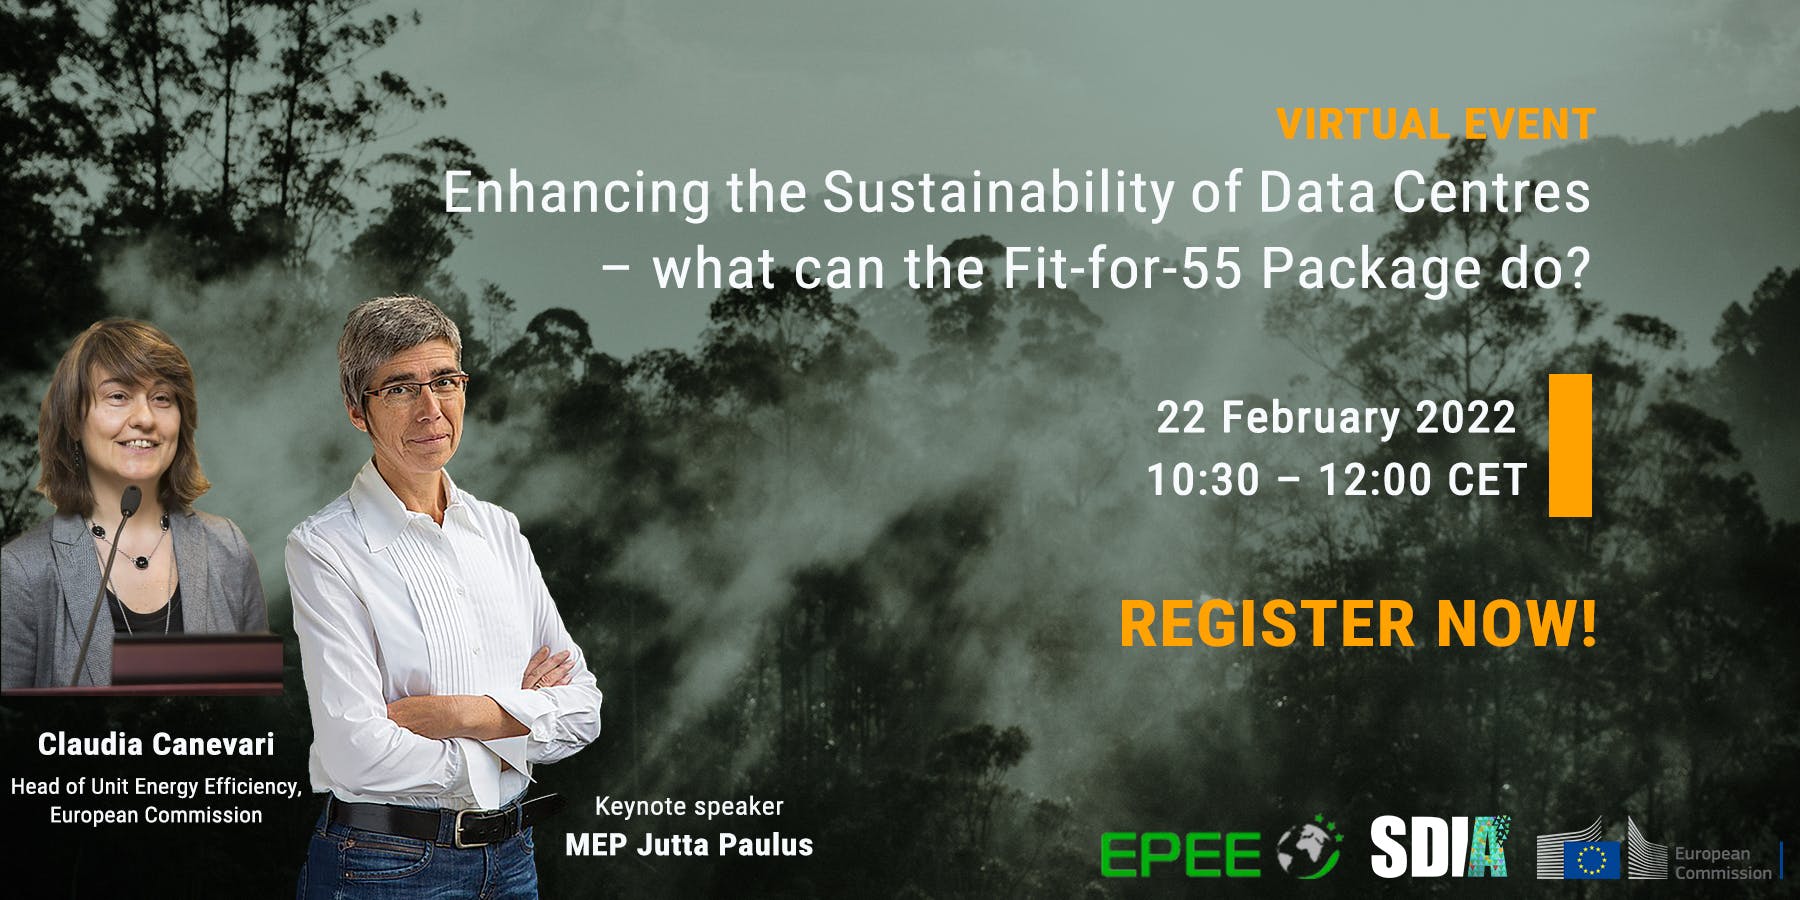 Key insights from EPEE & SDIA event - ‘Enhancing the Sustainability of Data Centres - what can the Fit-for-55 Package do?’